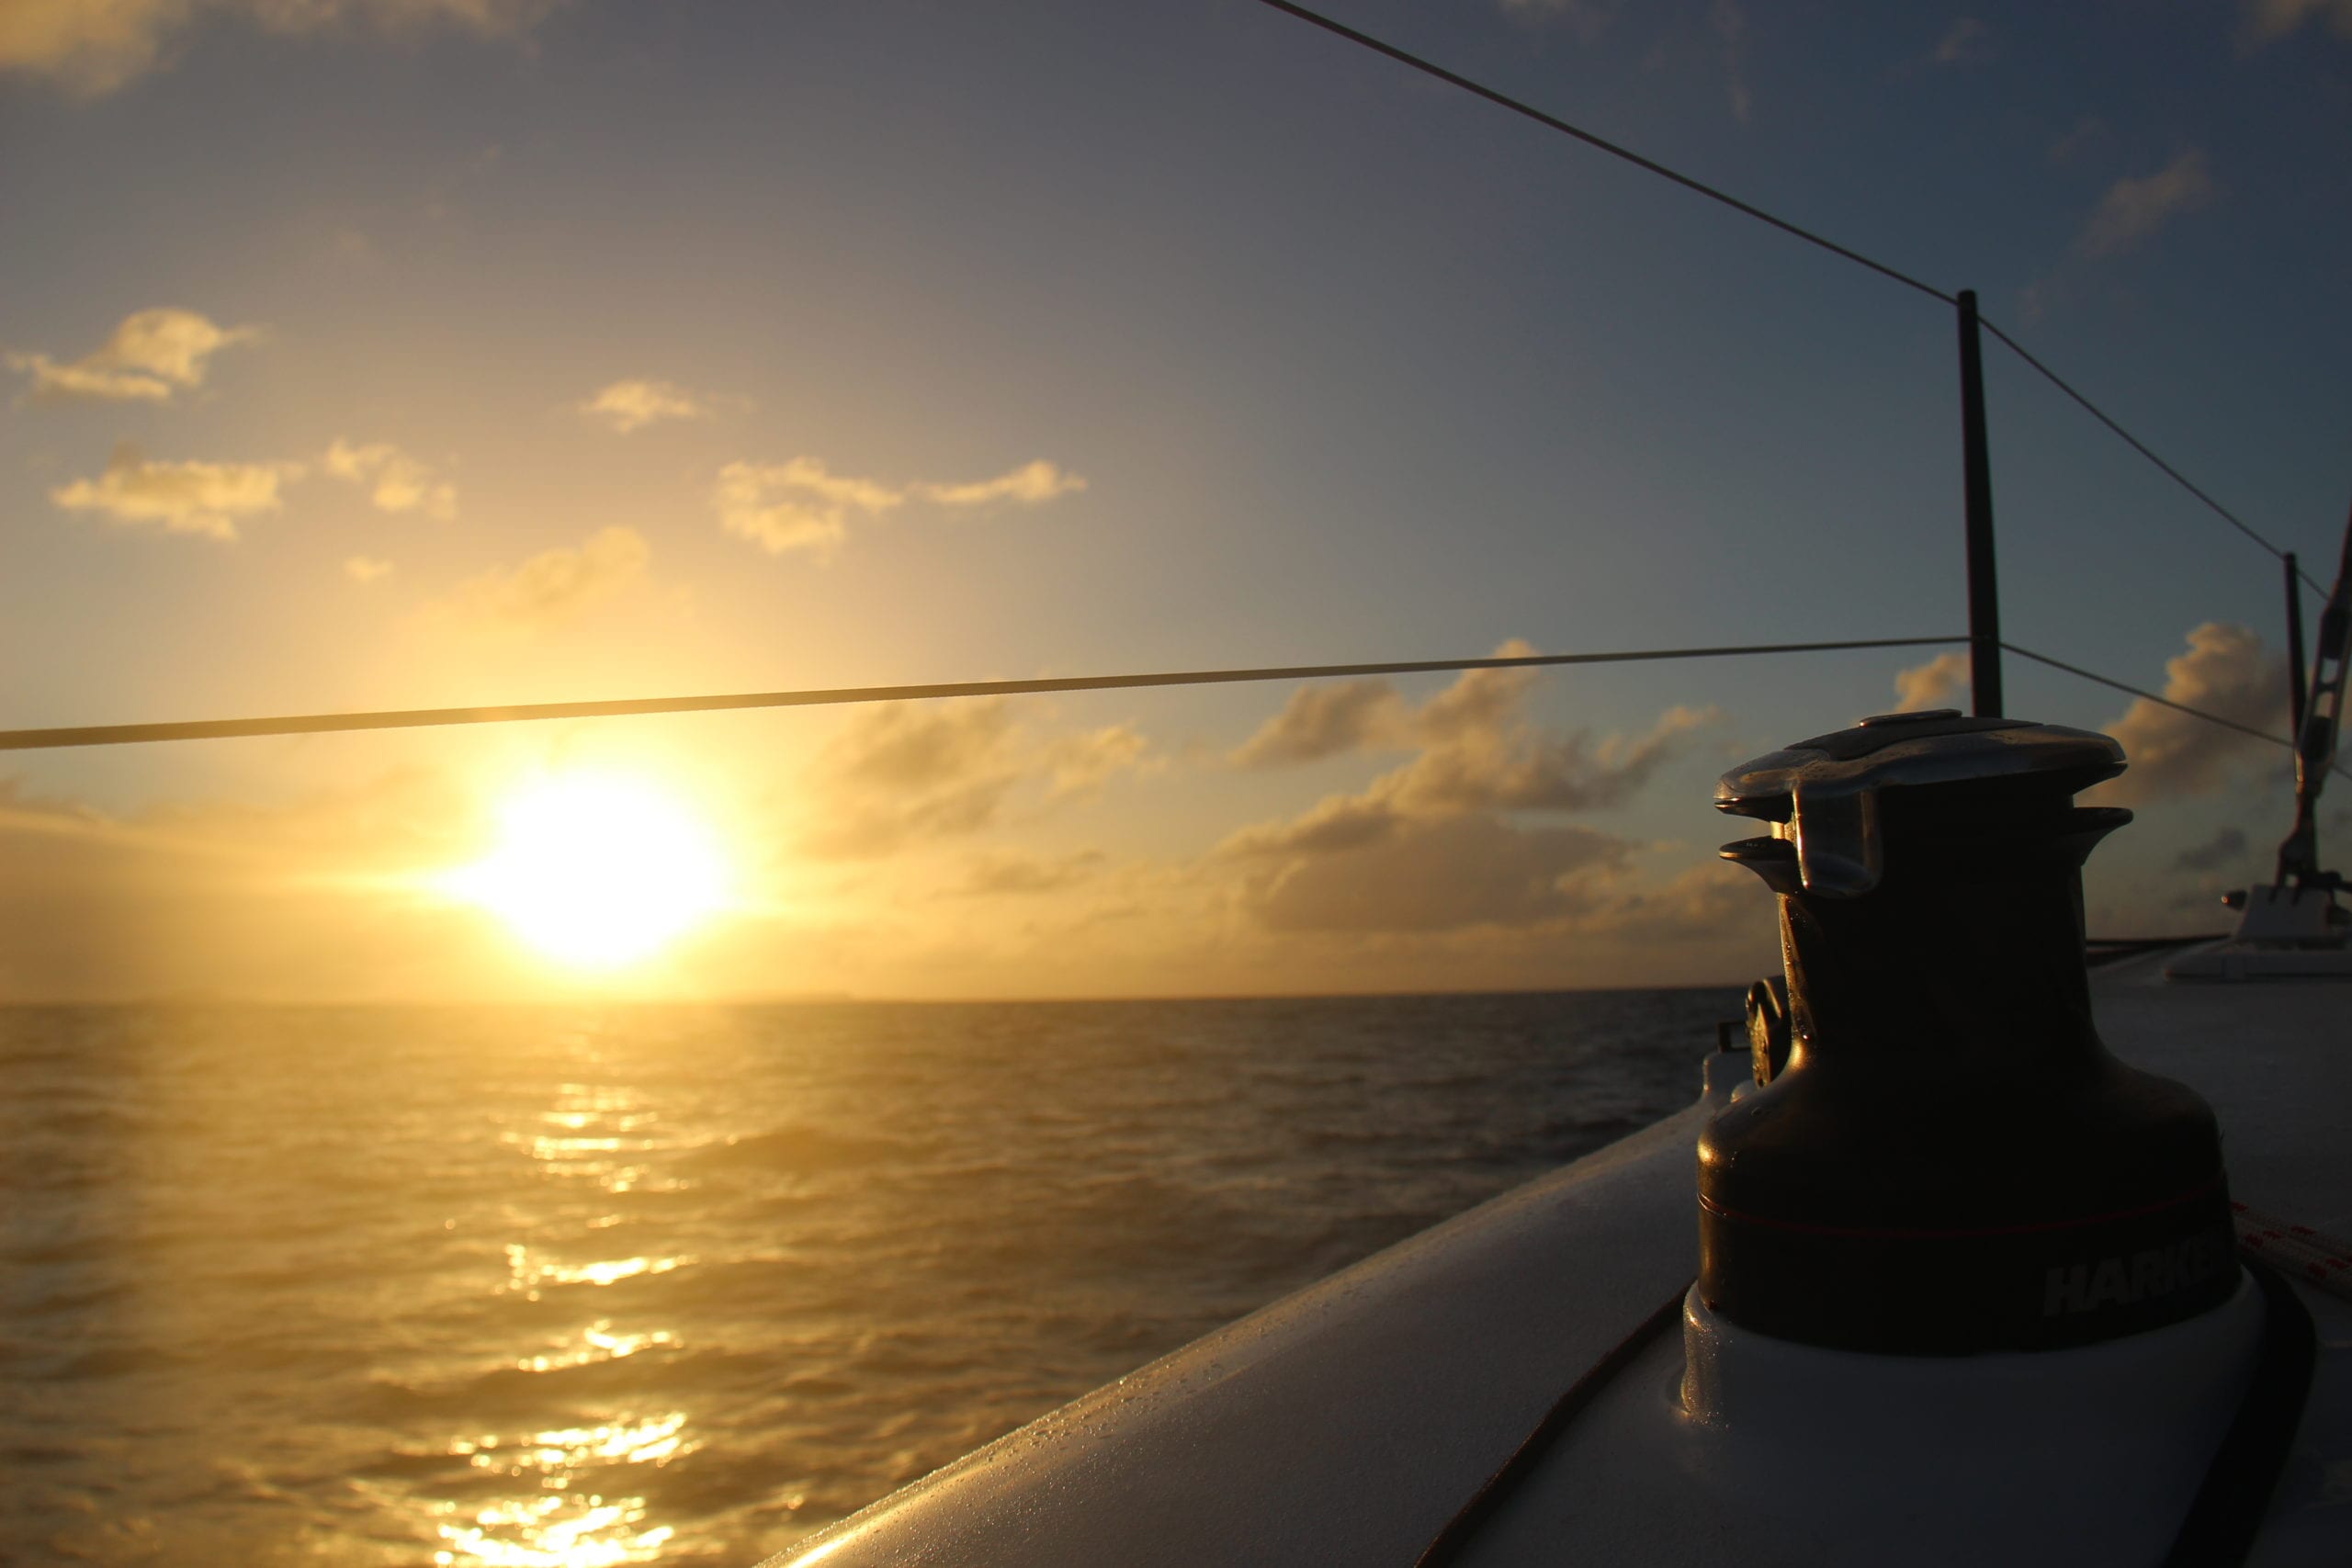 One of the many amazing views seen each day on board the Sail Surf ROAM adventure.